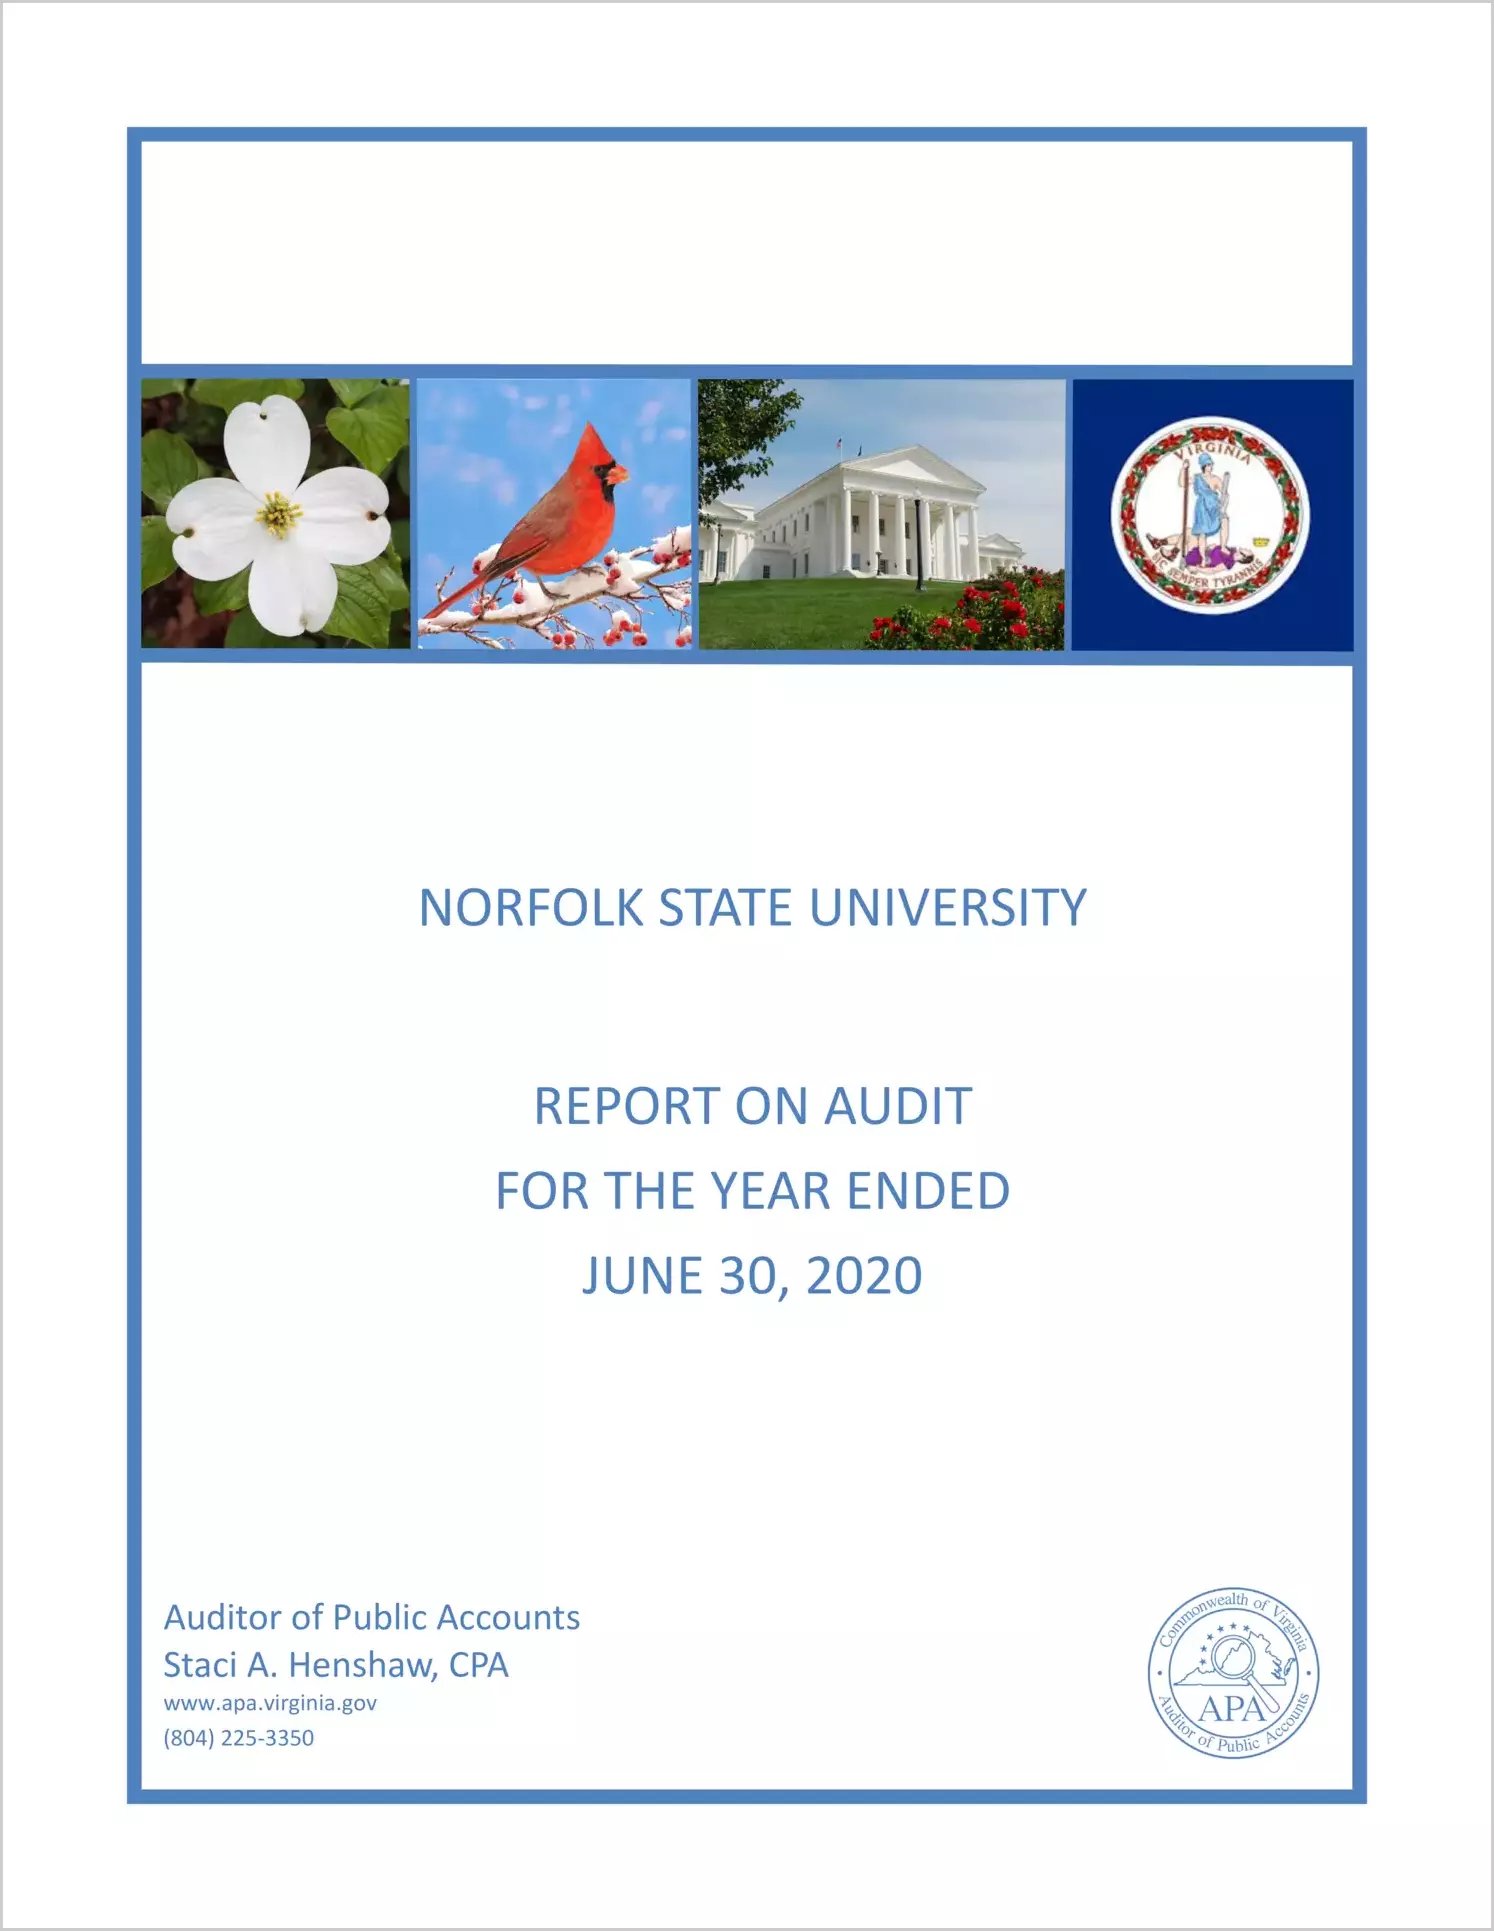 Norfolk State University for the year ended June 30, 2020